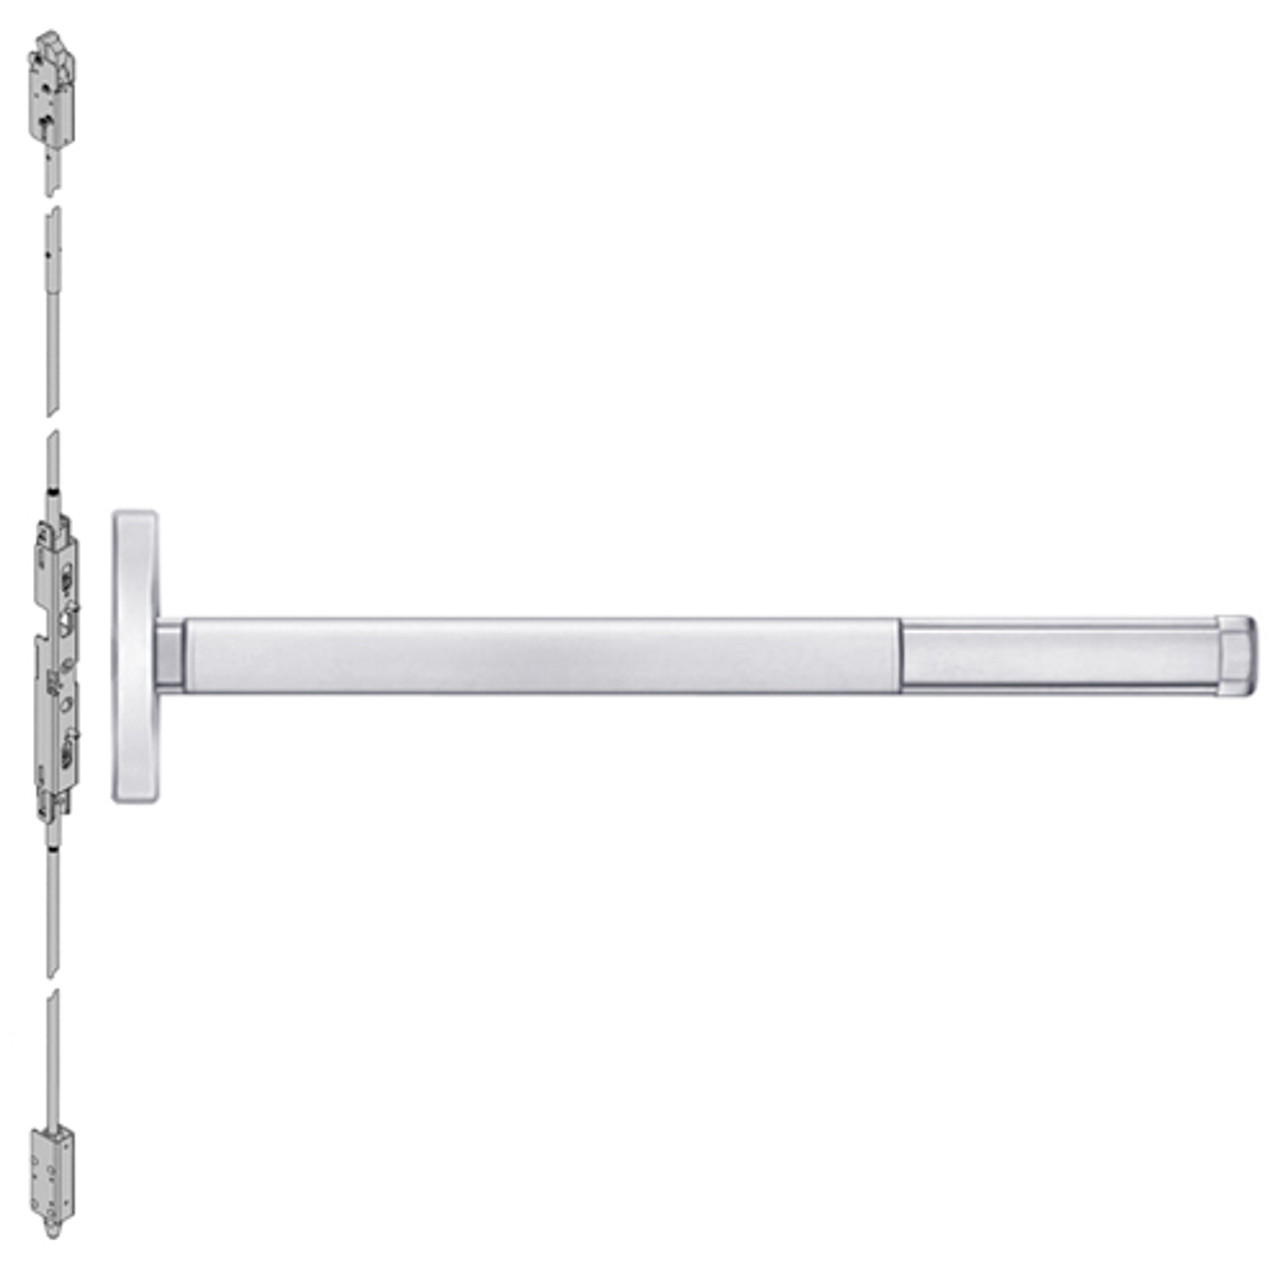 ELRFL2614LBR-625-48 PHI 2600 Series Fire Rated Concealed Vertical Rod Exit Device with Electric Latch Retraction Prepped for Lever Always Active in Bright Chrome Finish